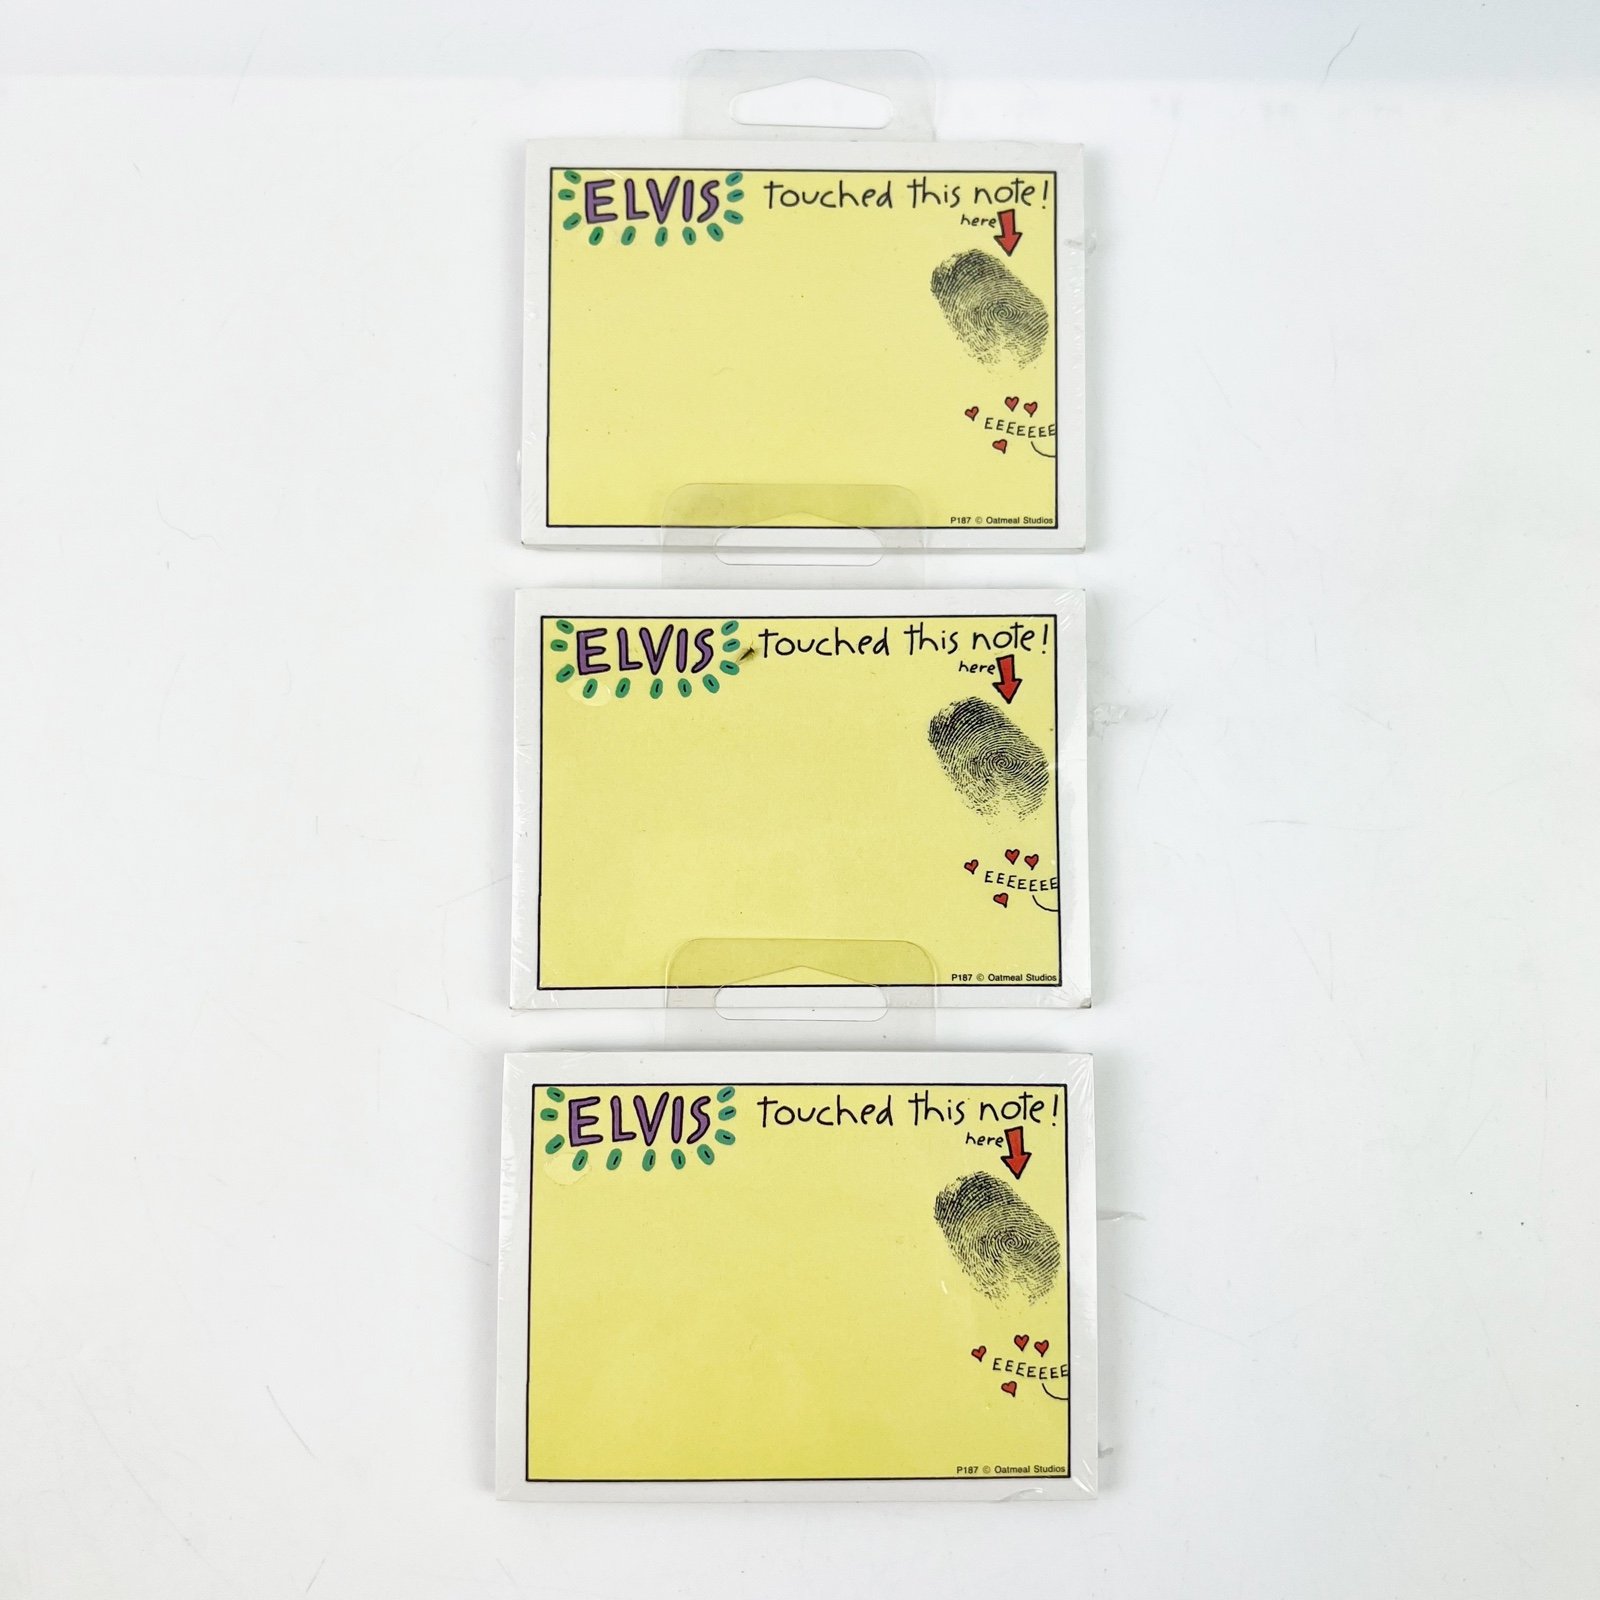 NEW 3 Vintage Post-it Note Pads 3M “Elvis Touched This Note” 40 Sheets Each bG9wg4ajV